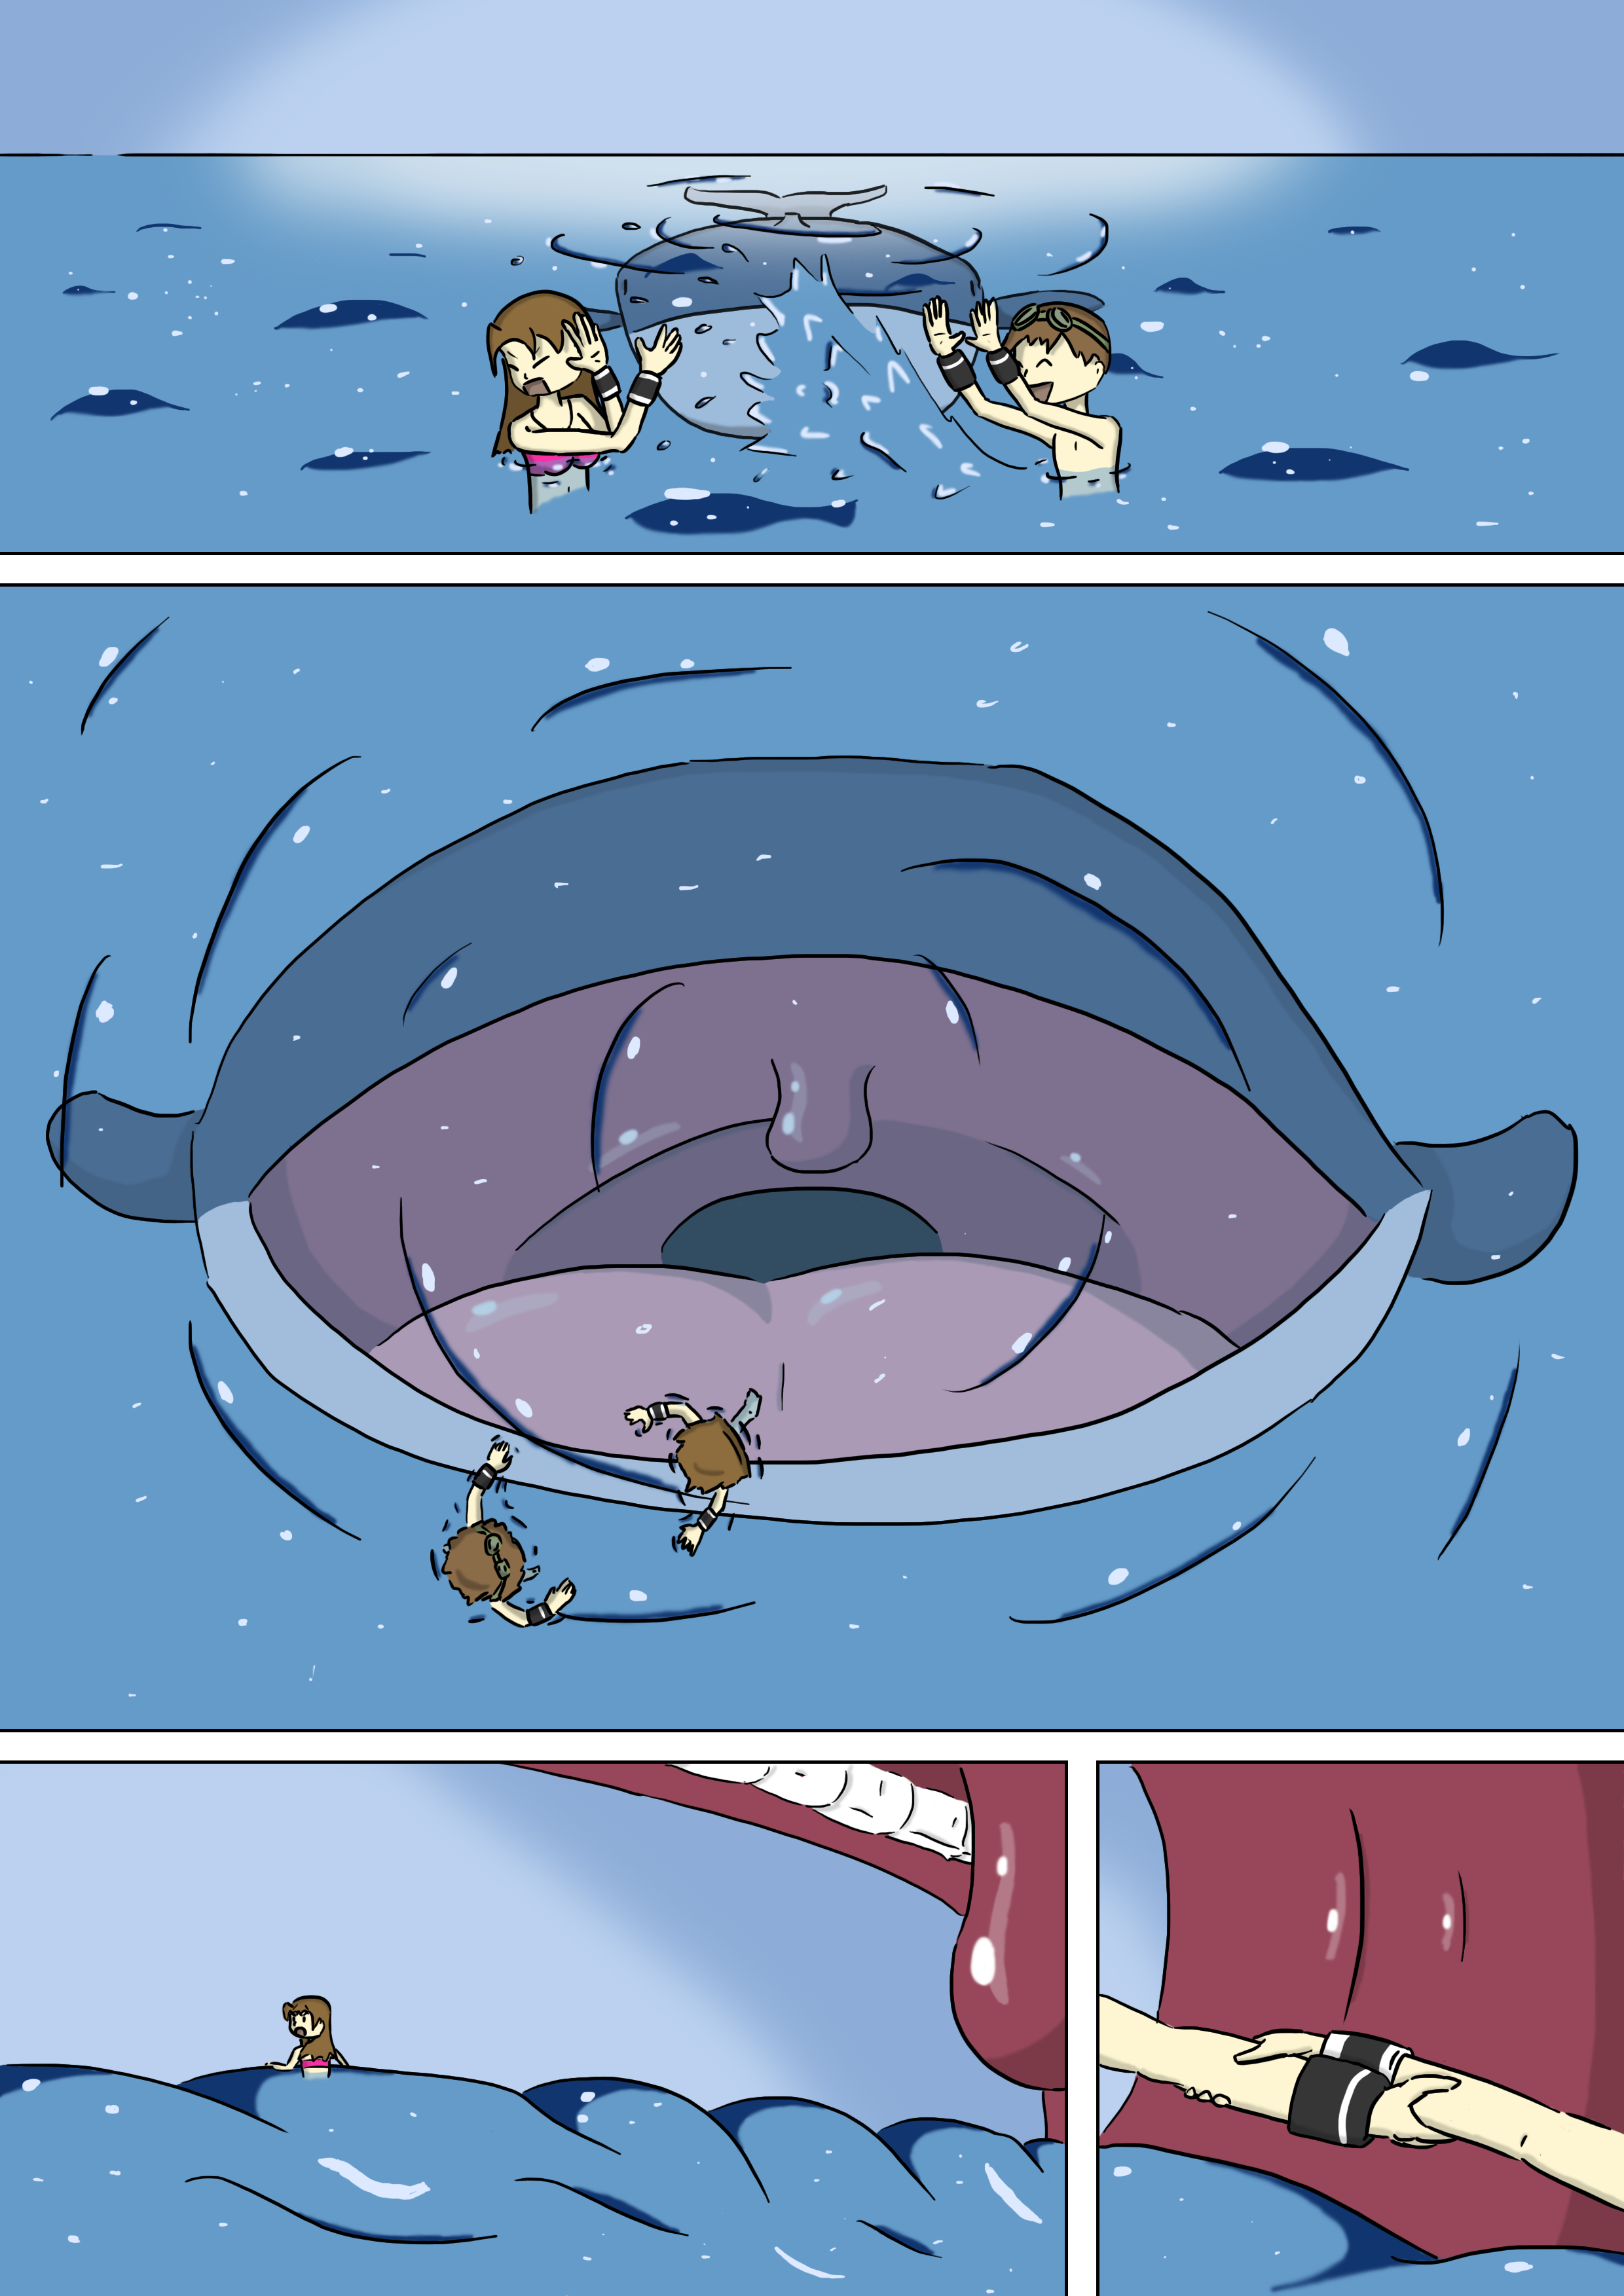 The whale and the beach (2/3) by RaharuCV on DeviantArt.